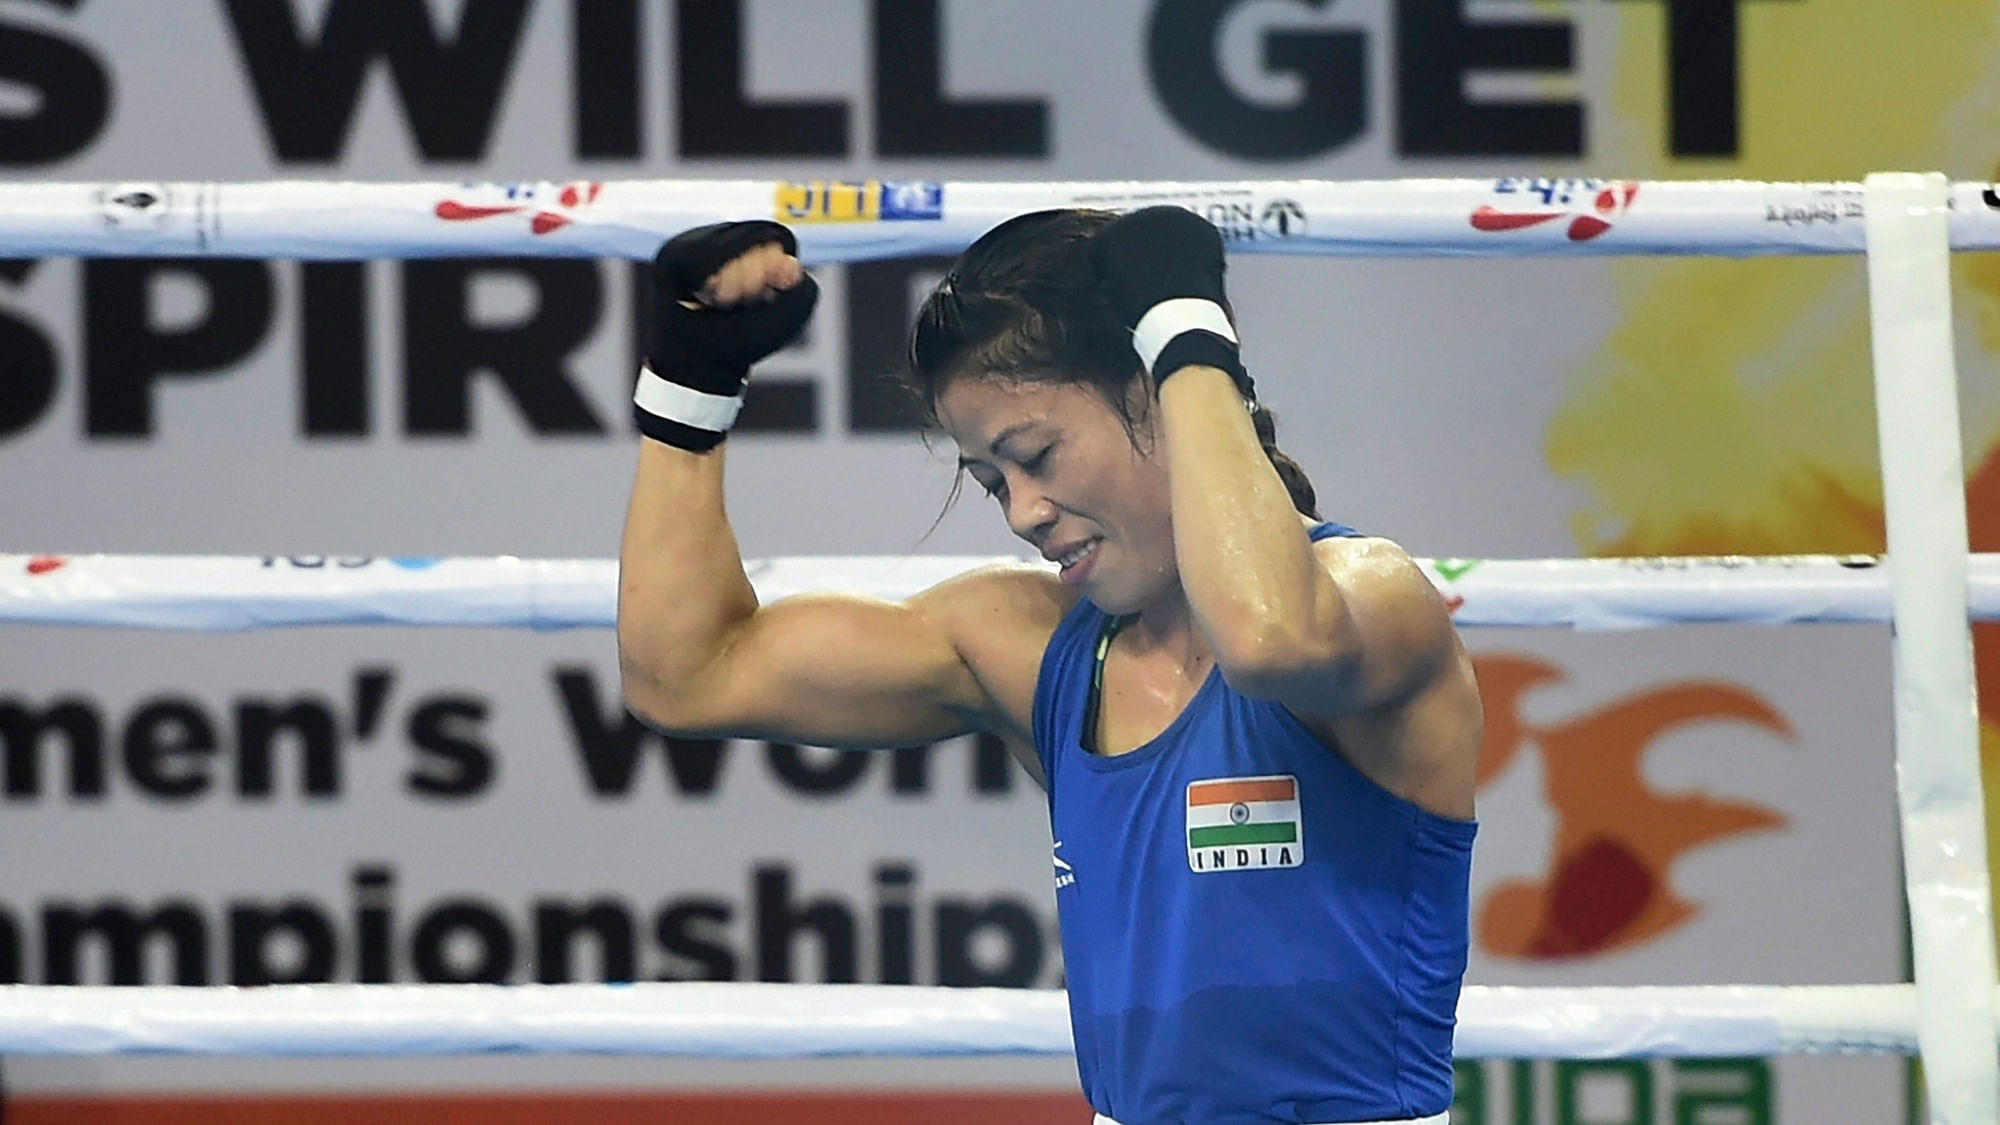 Mary Kom along with three other boxers will be competing in the semi-finals of the World Boxing Championships.